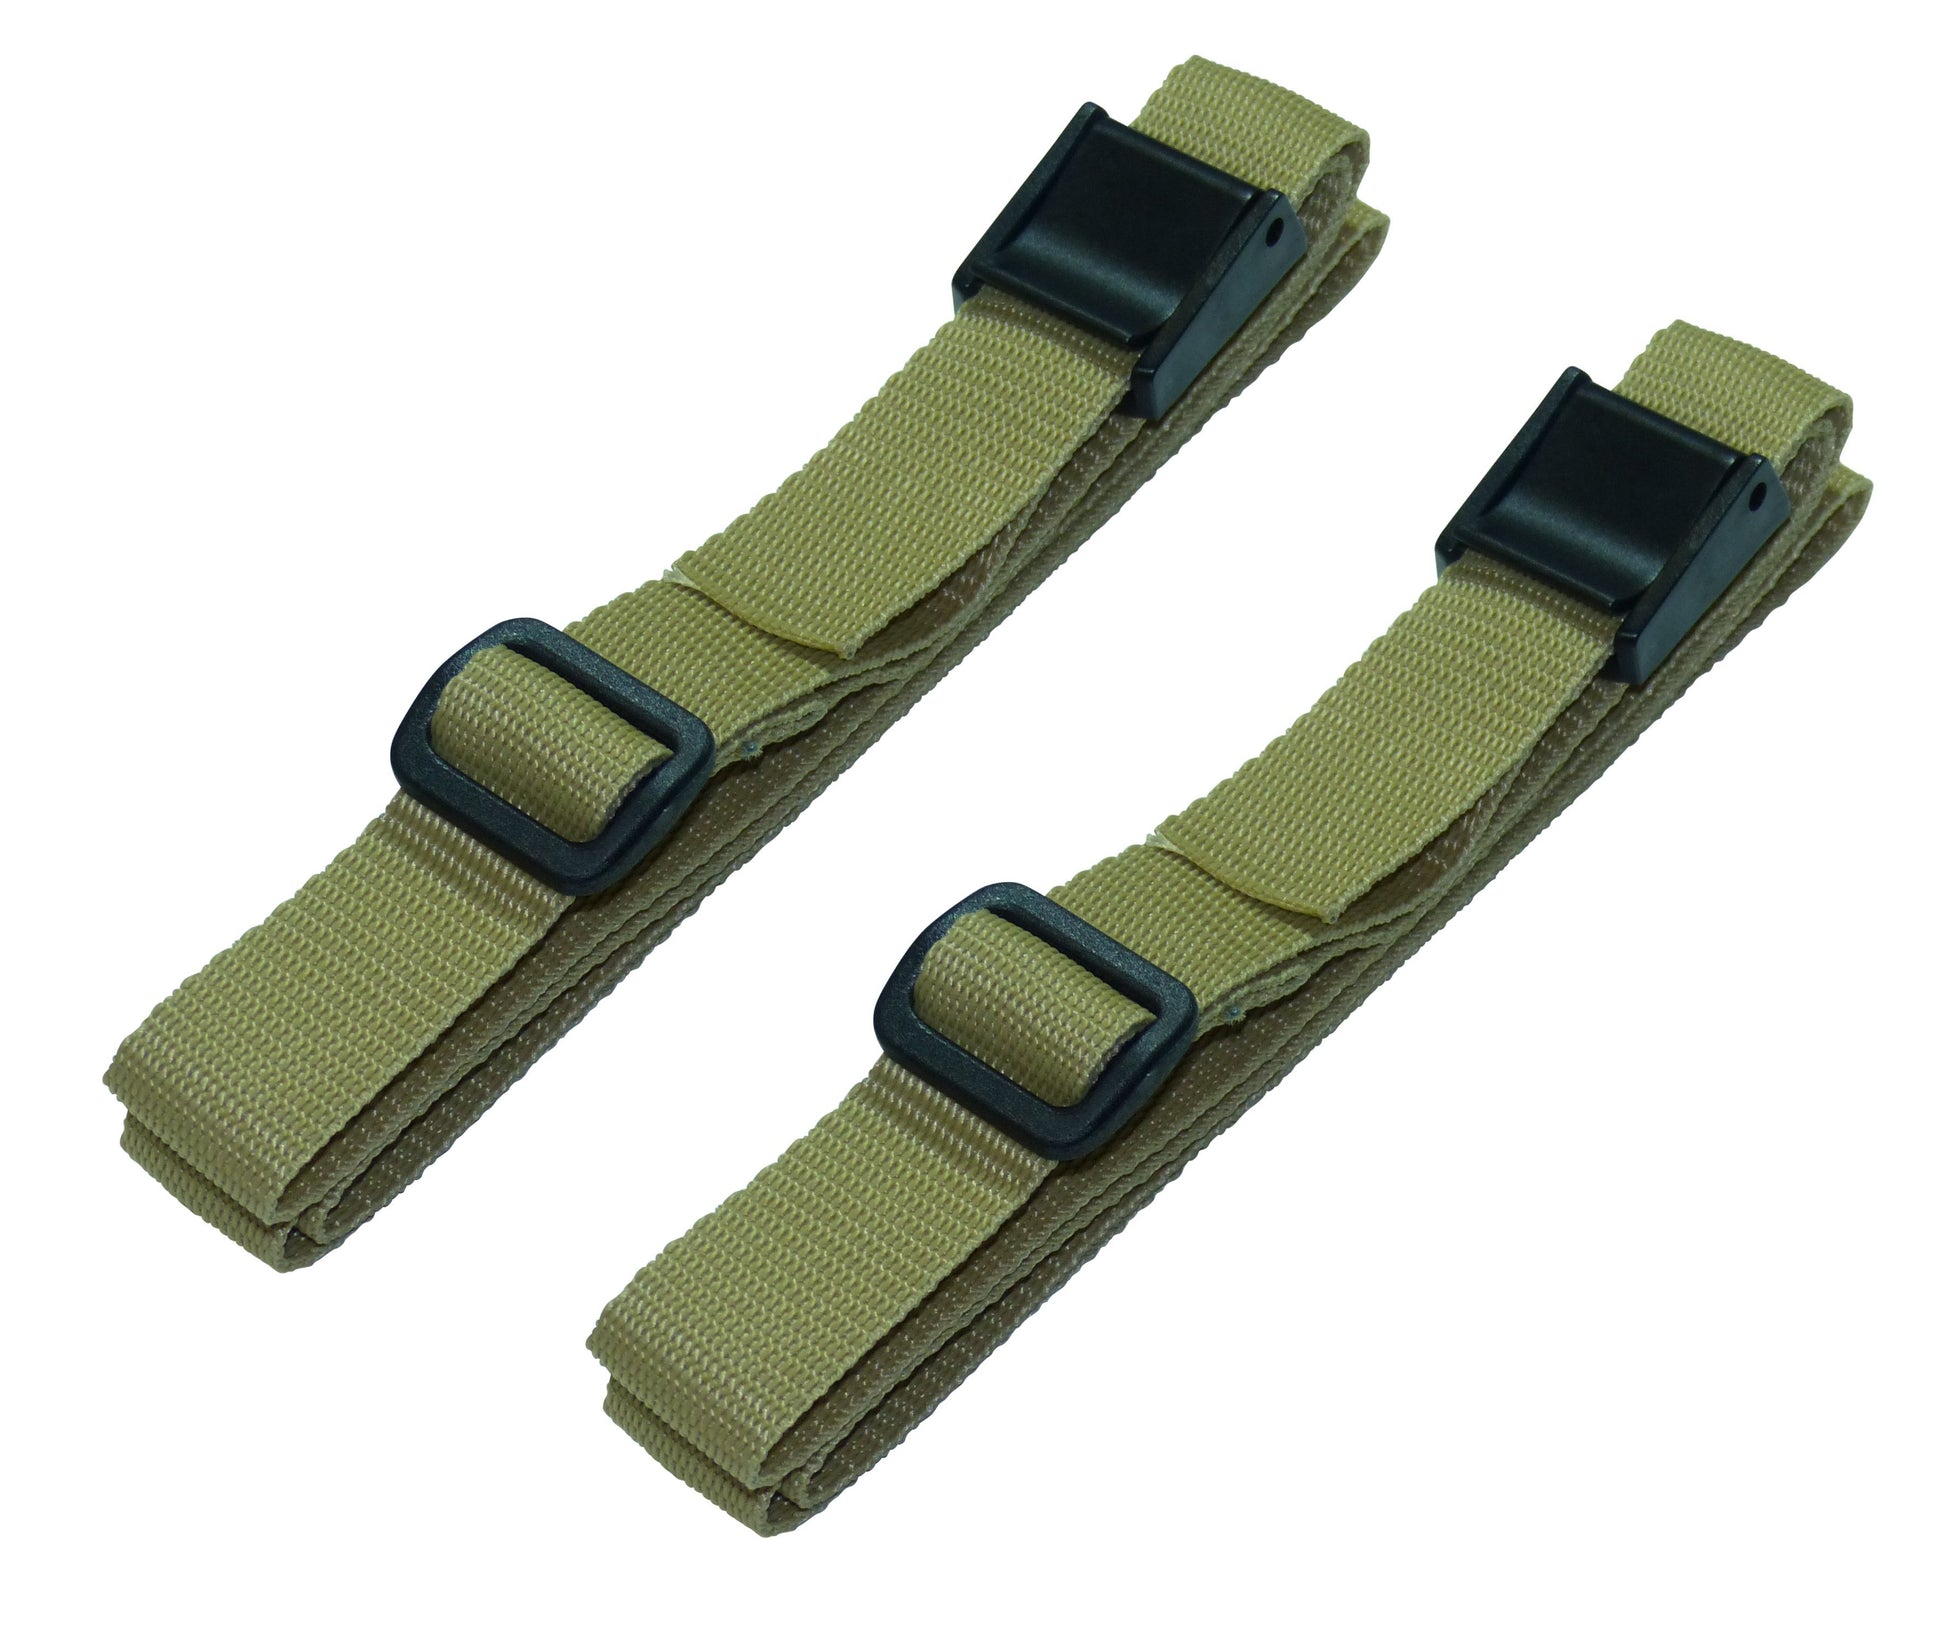 25mm Rivetted Strap with Plastic Cam Buckle & Triglide Buckles (Pair) in beige